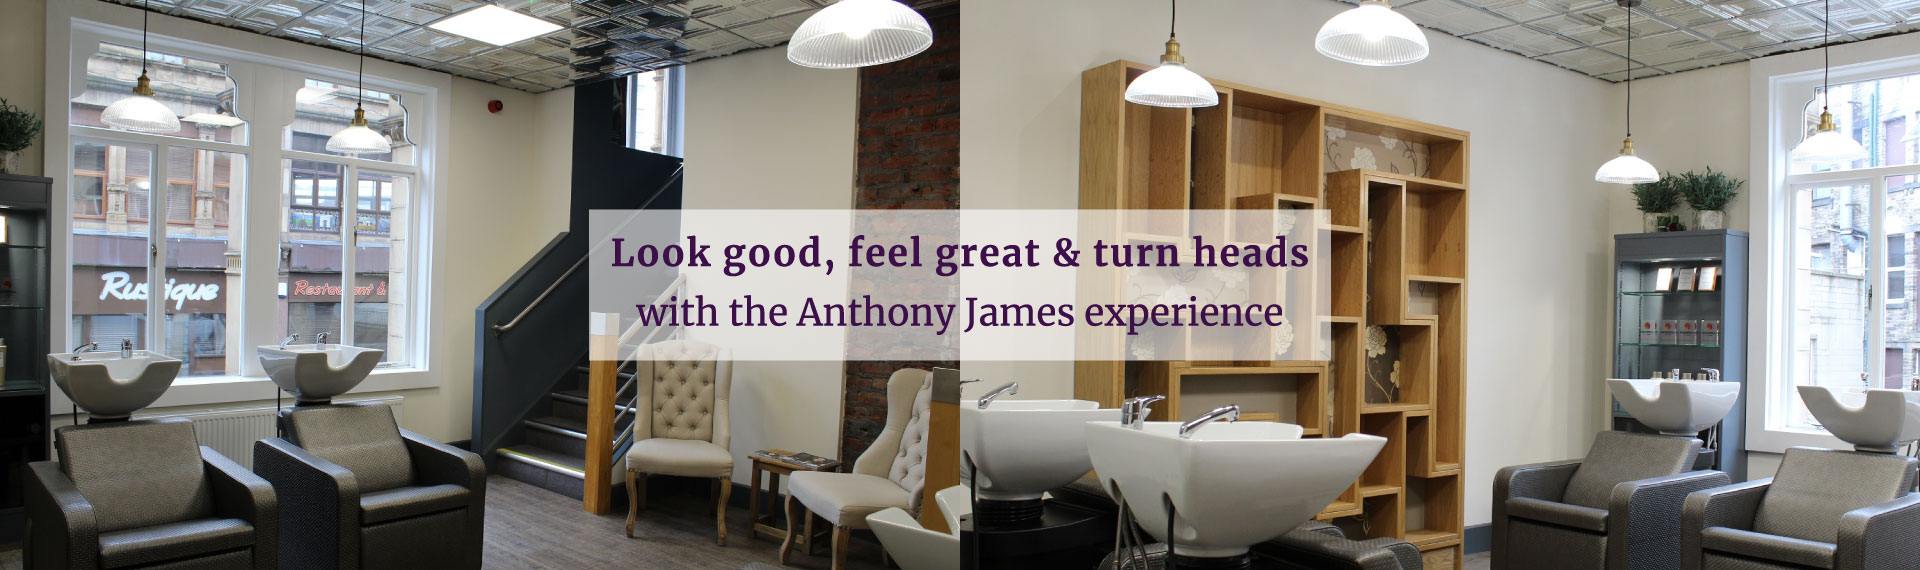 Anthony James Salon Experience, Hair Colour Experts In Halifax